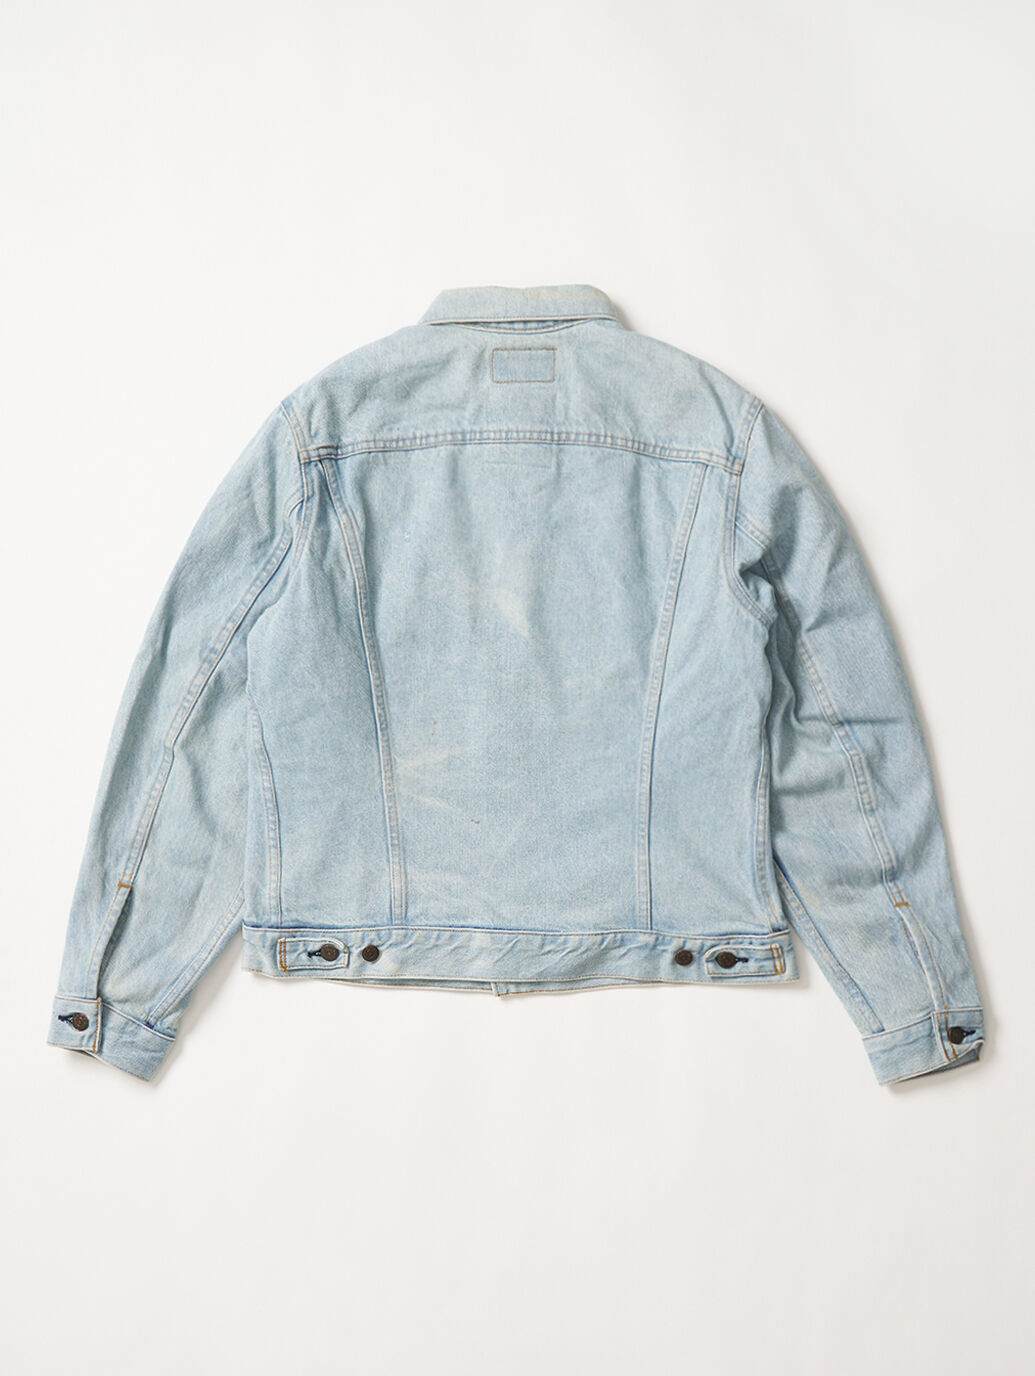 LEVI'S® AUTHORIZED VINTAGE MADE IN THE USA フランネルトラッカー 